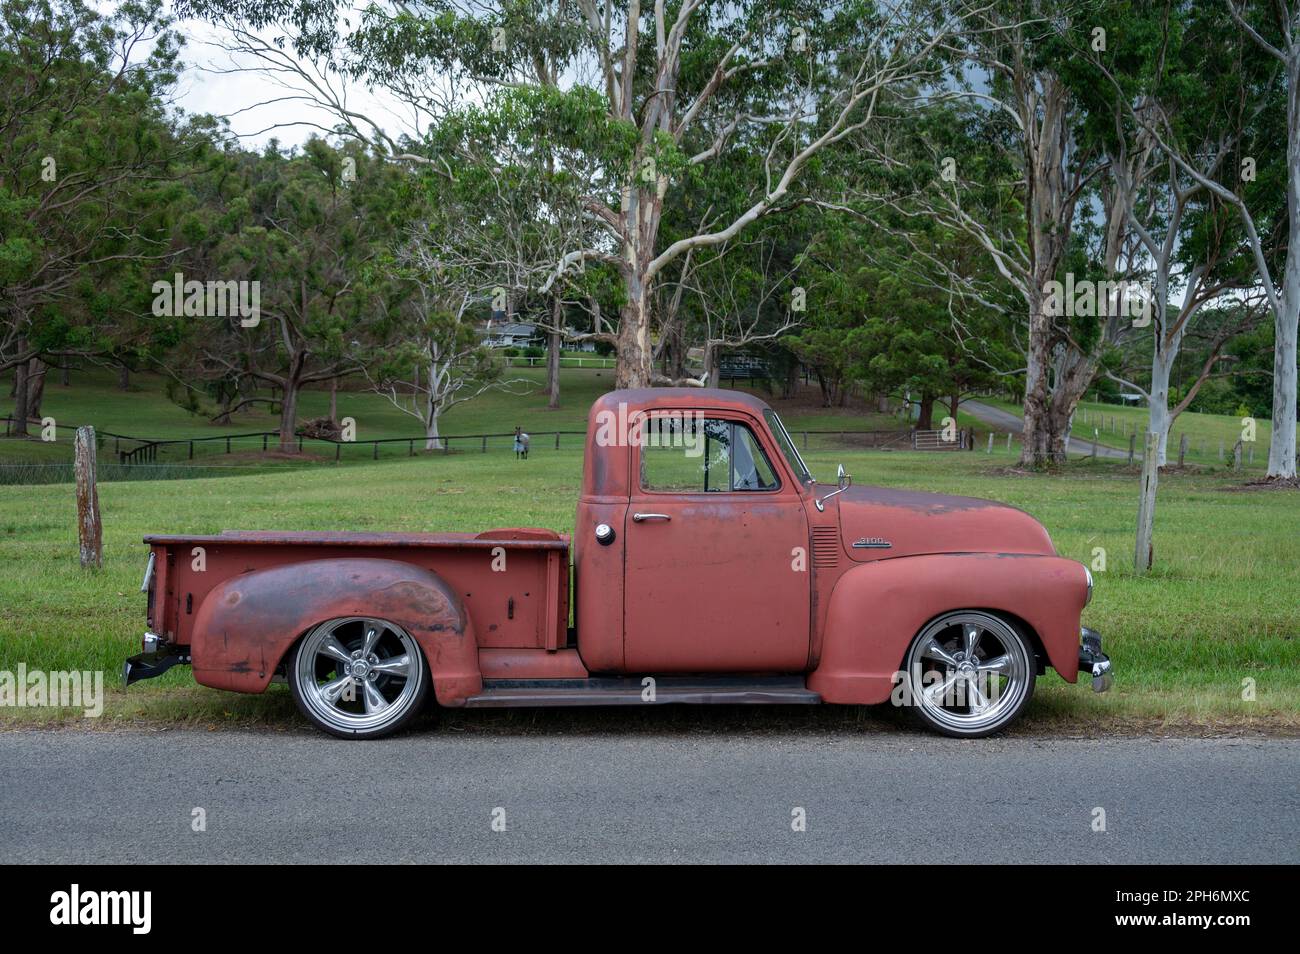 A 1953 American Chevrolet 3100 pickup truck. Original paintwork but with a brand new Chevrolet 3.5 litre V8 block and 3 speed automatic transmission. Stock Photo